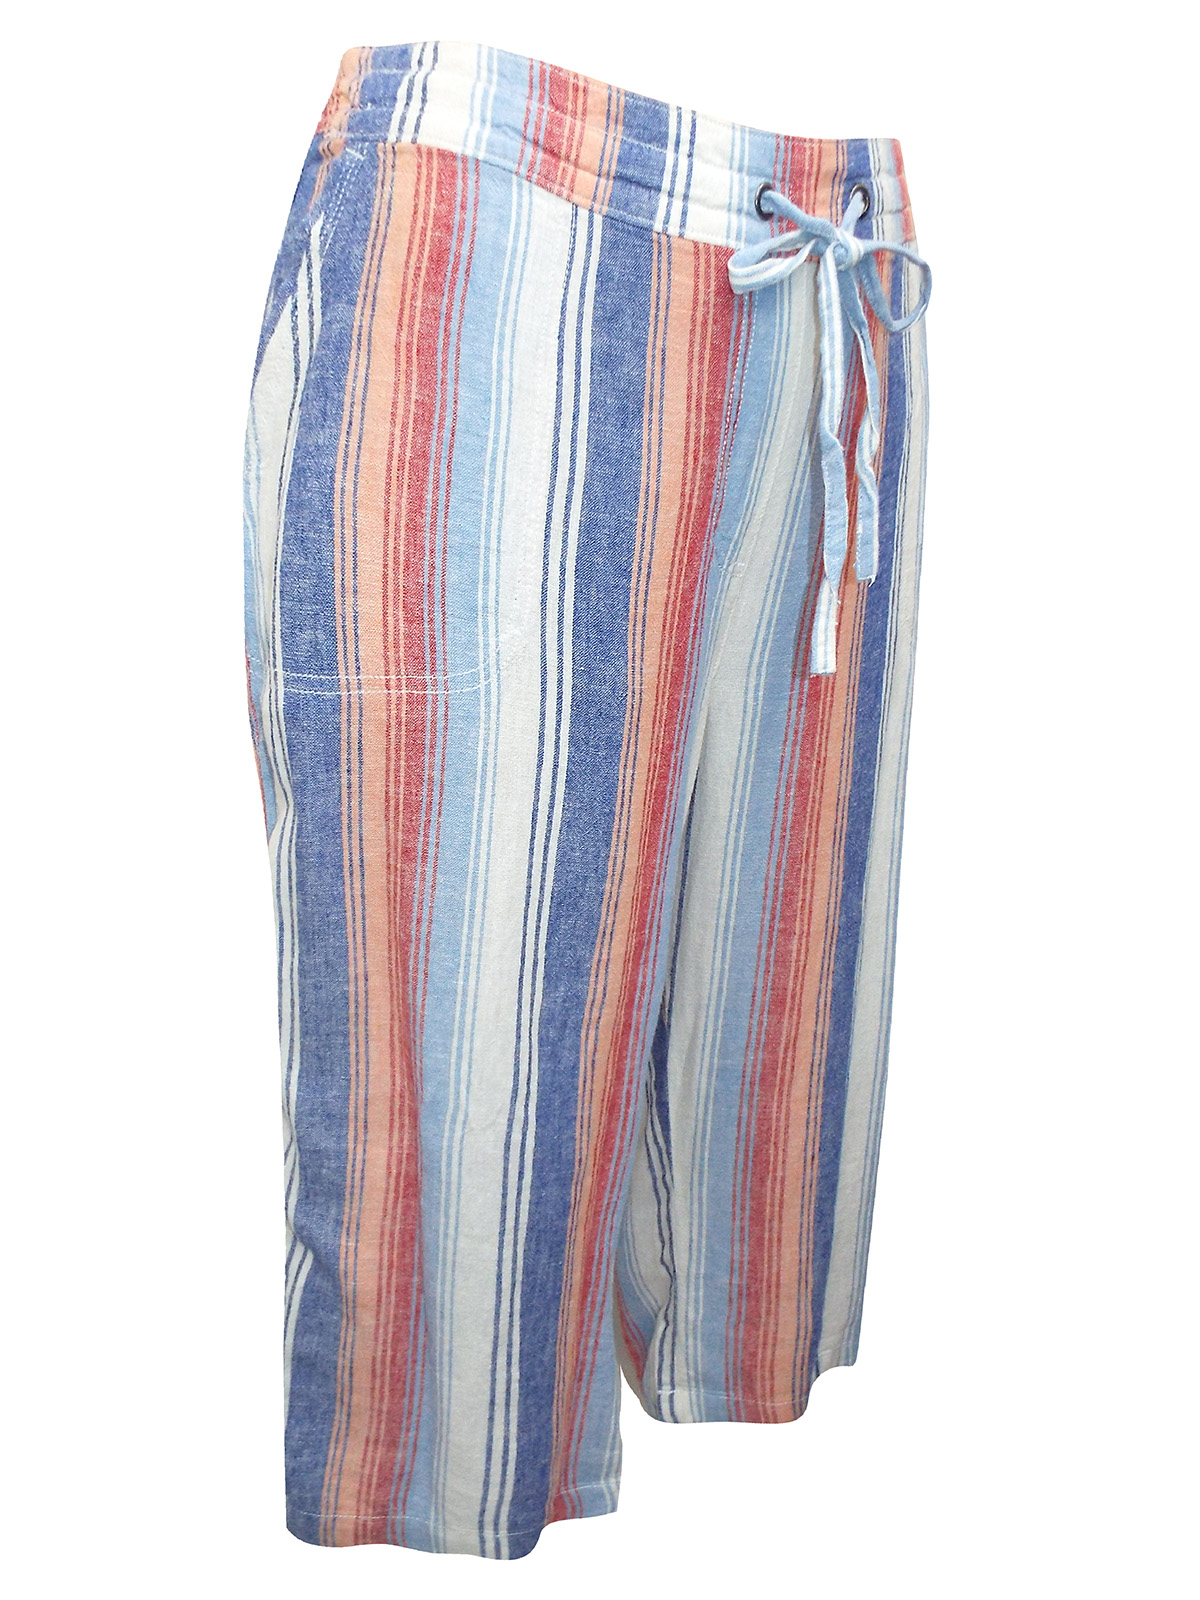 Marks and Spencer - - M&5 BLUE Linen Blend Striped Cropped Trousers